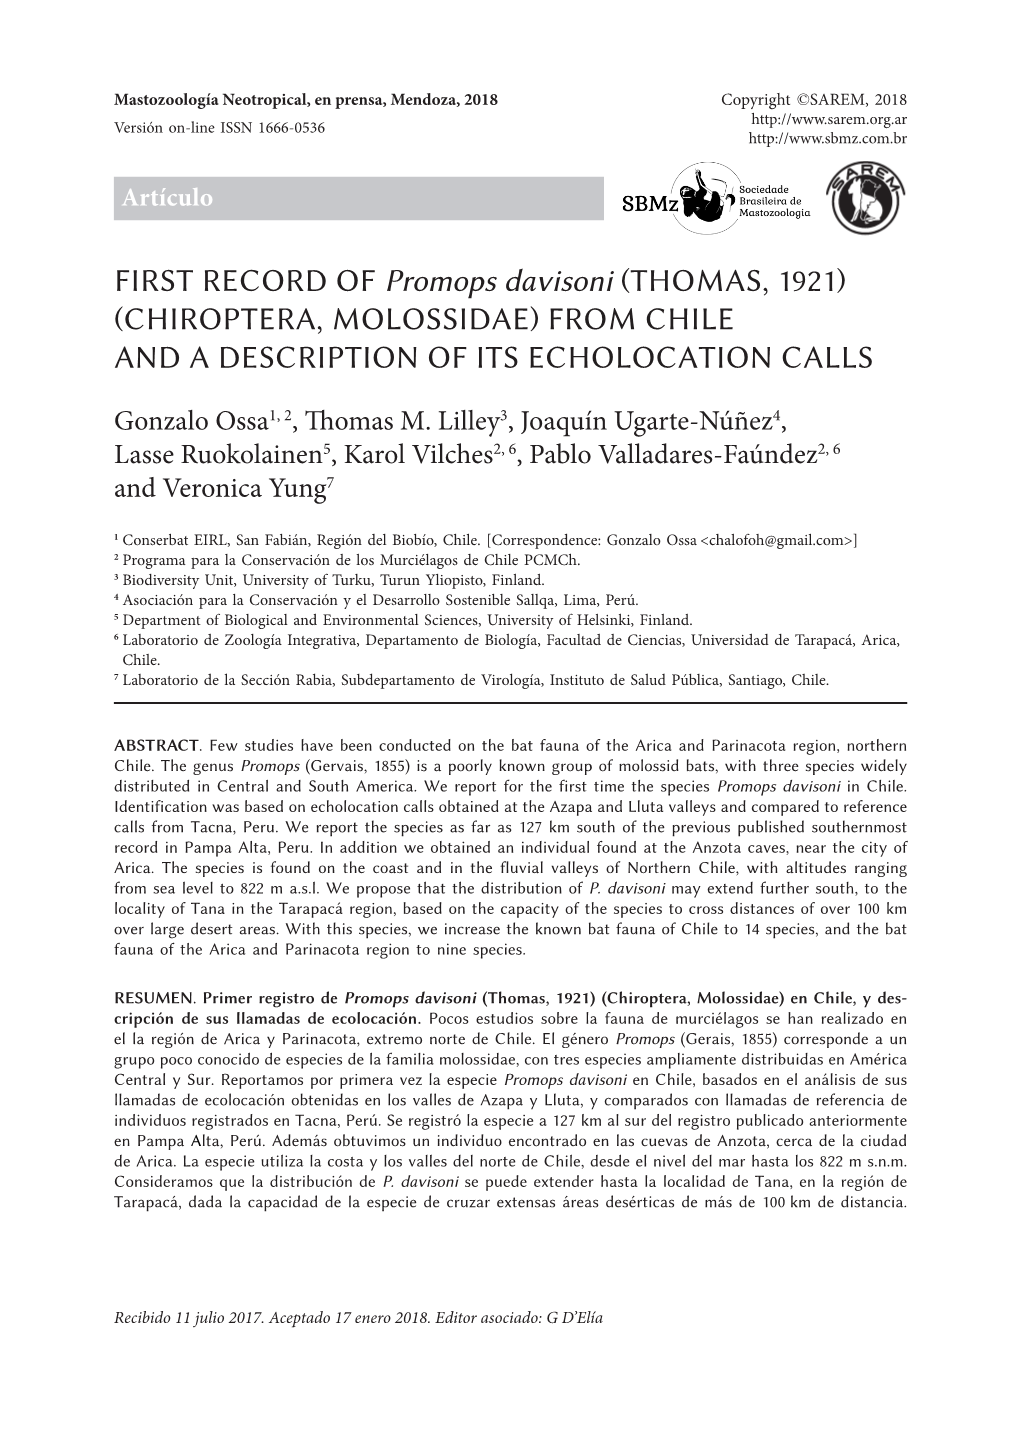 FIRST RECORD of Promops Davisoni (THOMAS, 1921) (CHIROPTERA, MOLOSSIDAE) from CHILE and a DESCRIPTION of ITS ECHOLOCATION CALLS